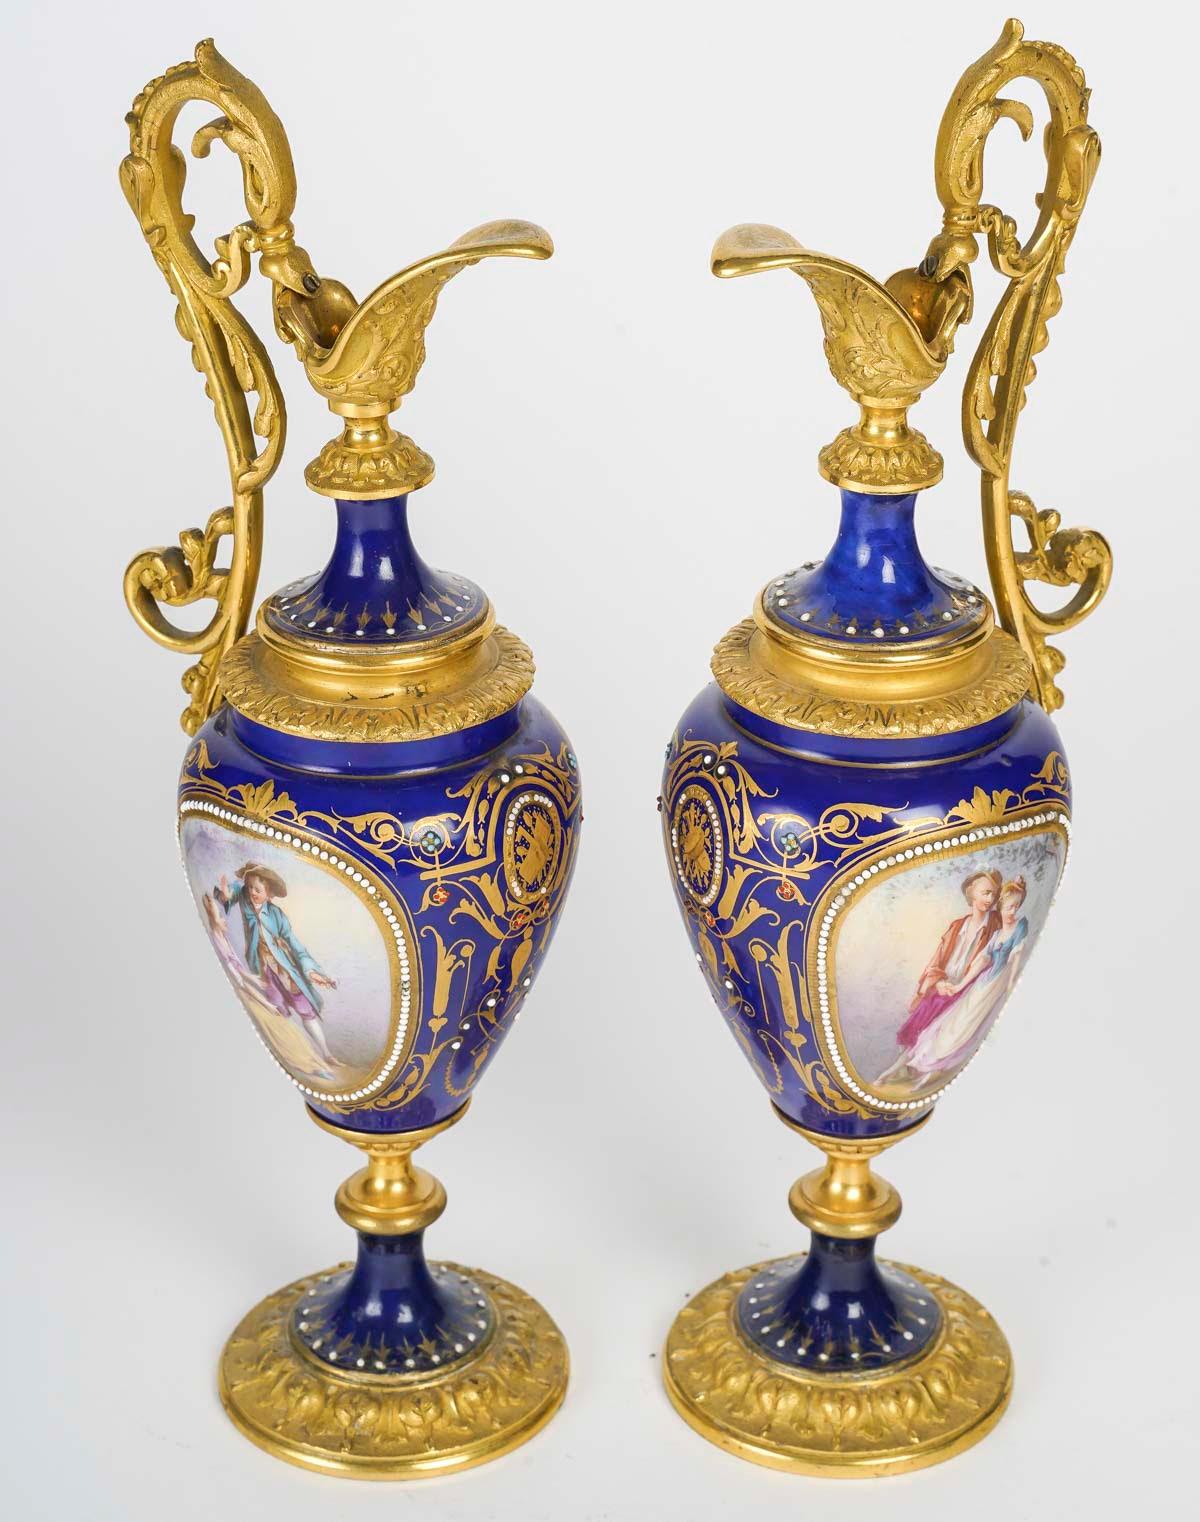 A pair of gilt bronze and royal blue porcelain ewers, 19th century, Napoleon III period.

A pair of gilt bronze and royal blue porcelain ewers, gold enamelled with a hand-painted galant scene on the front and floral decoration on the back, fine